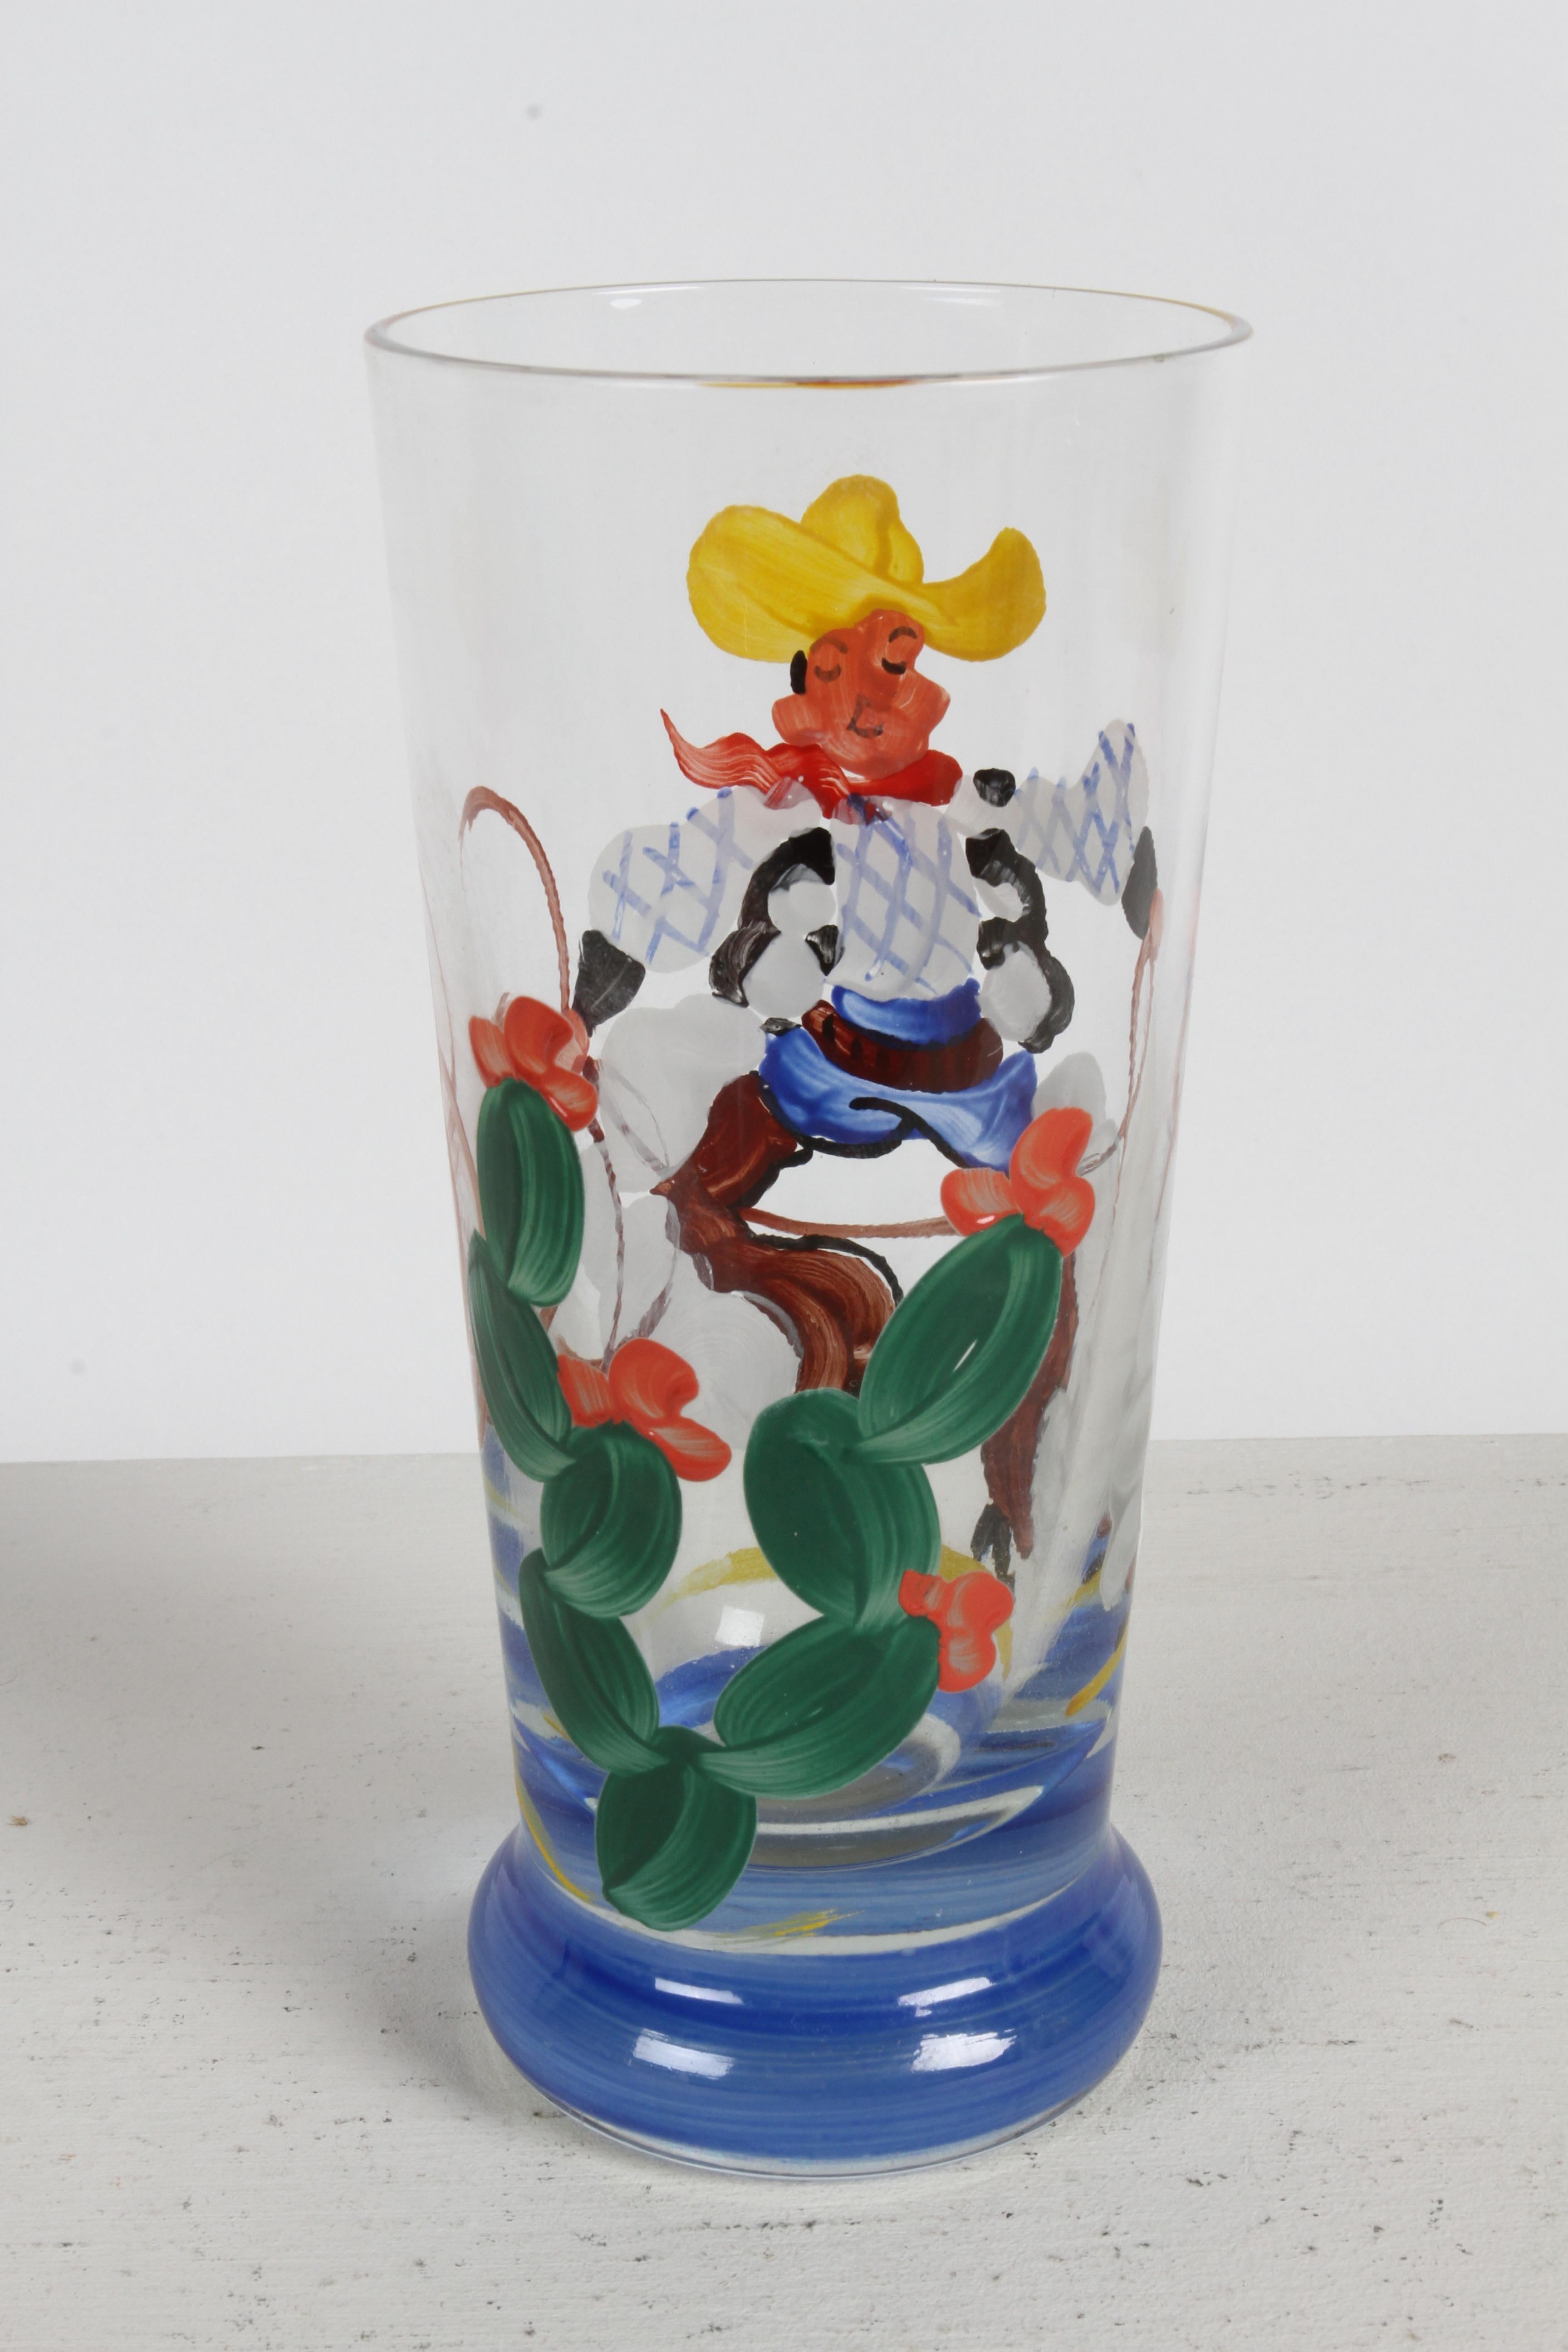 1940s Artist Hand-Painted Bar Glasses with Cowboy, Lasso & Cactus Theme - Rita  For Sale 9